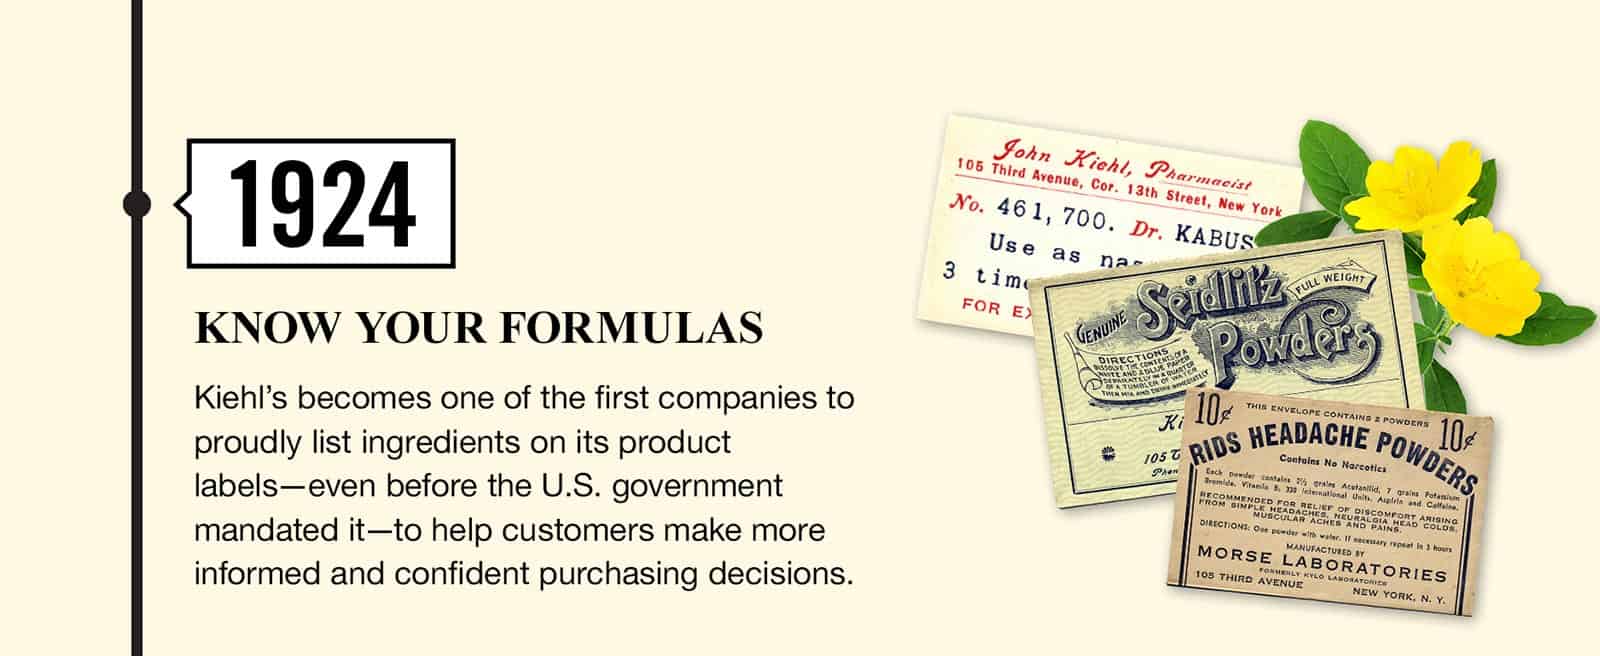 Kiehl's history in the year 1924